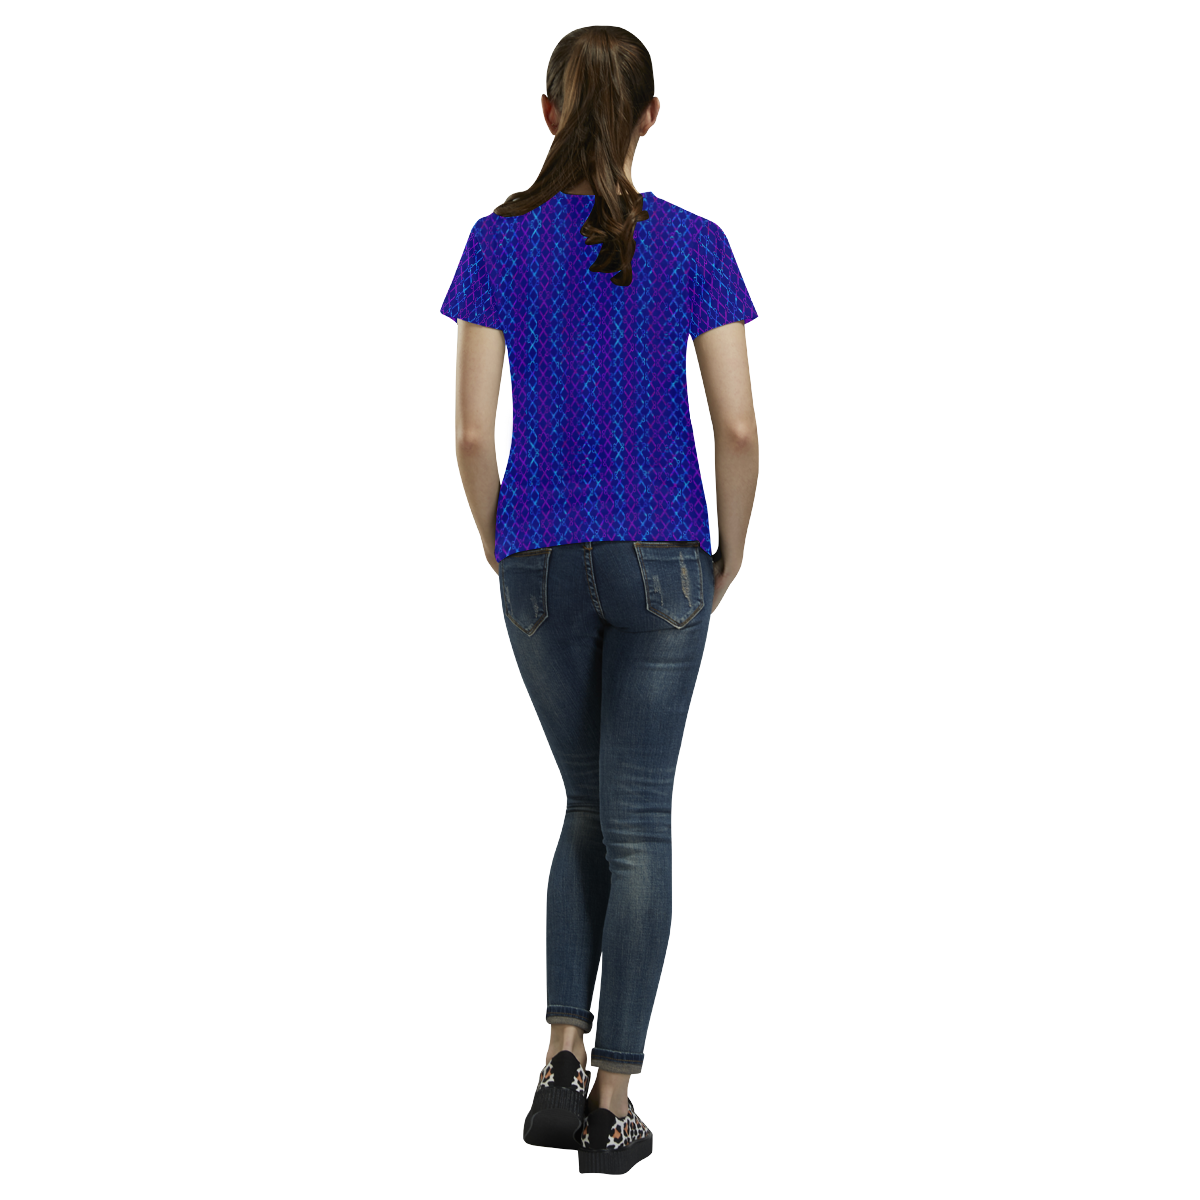 Scissor Stripes - Blue and Purple All Over Print T-Shirt for Women (USA Size) (Model T40)